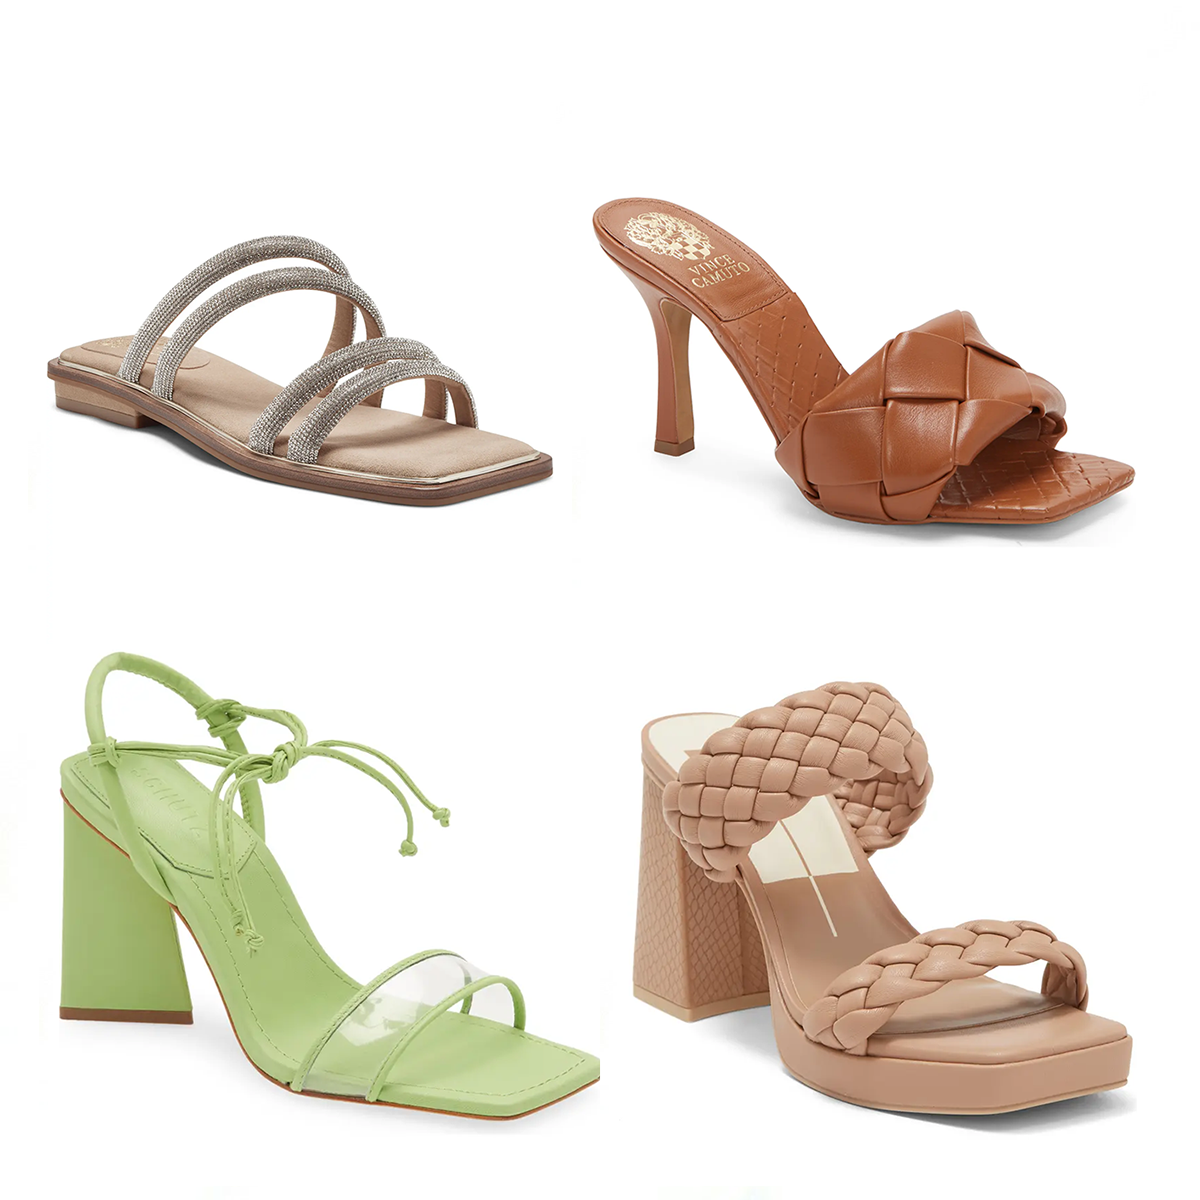 Nordstrom Rack Has 75% Off Deals on Summer Sandals for Every Style